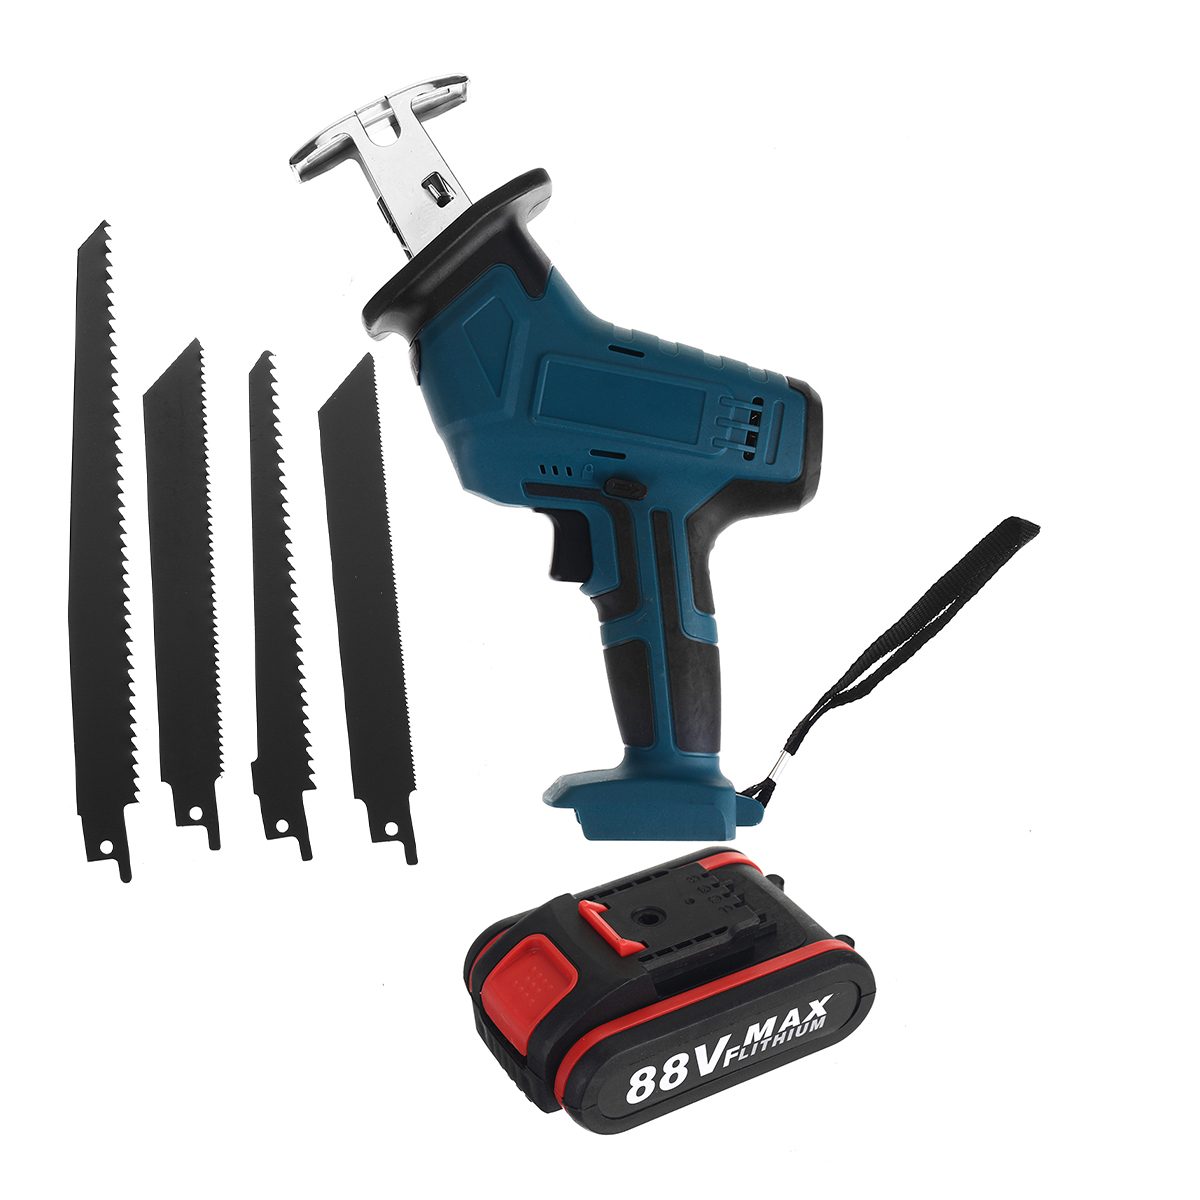 Cordless-Reciprocating-Saw-With-4-Blades--Battery-Rechargeable-Electric-Saw-for-Sawing-Branches-Meta-1684064-10